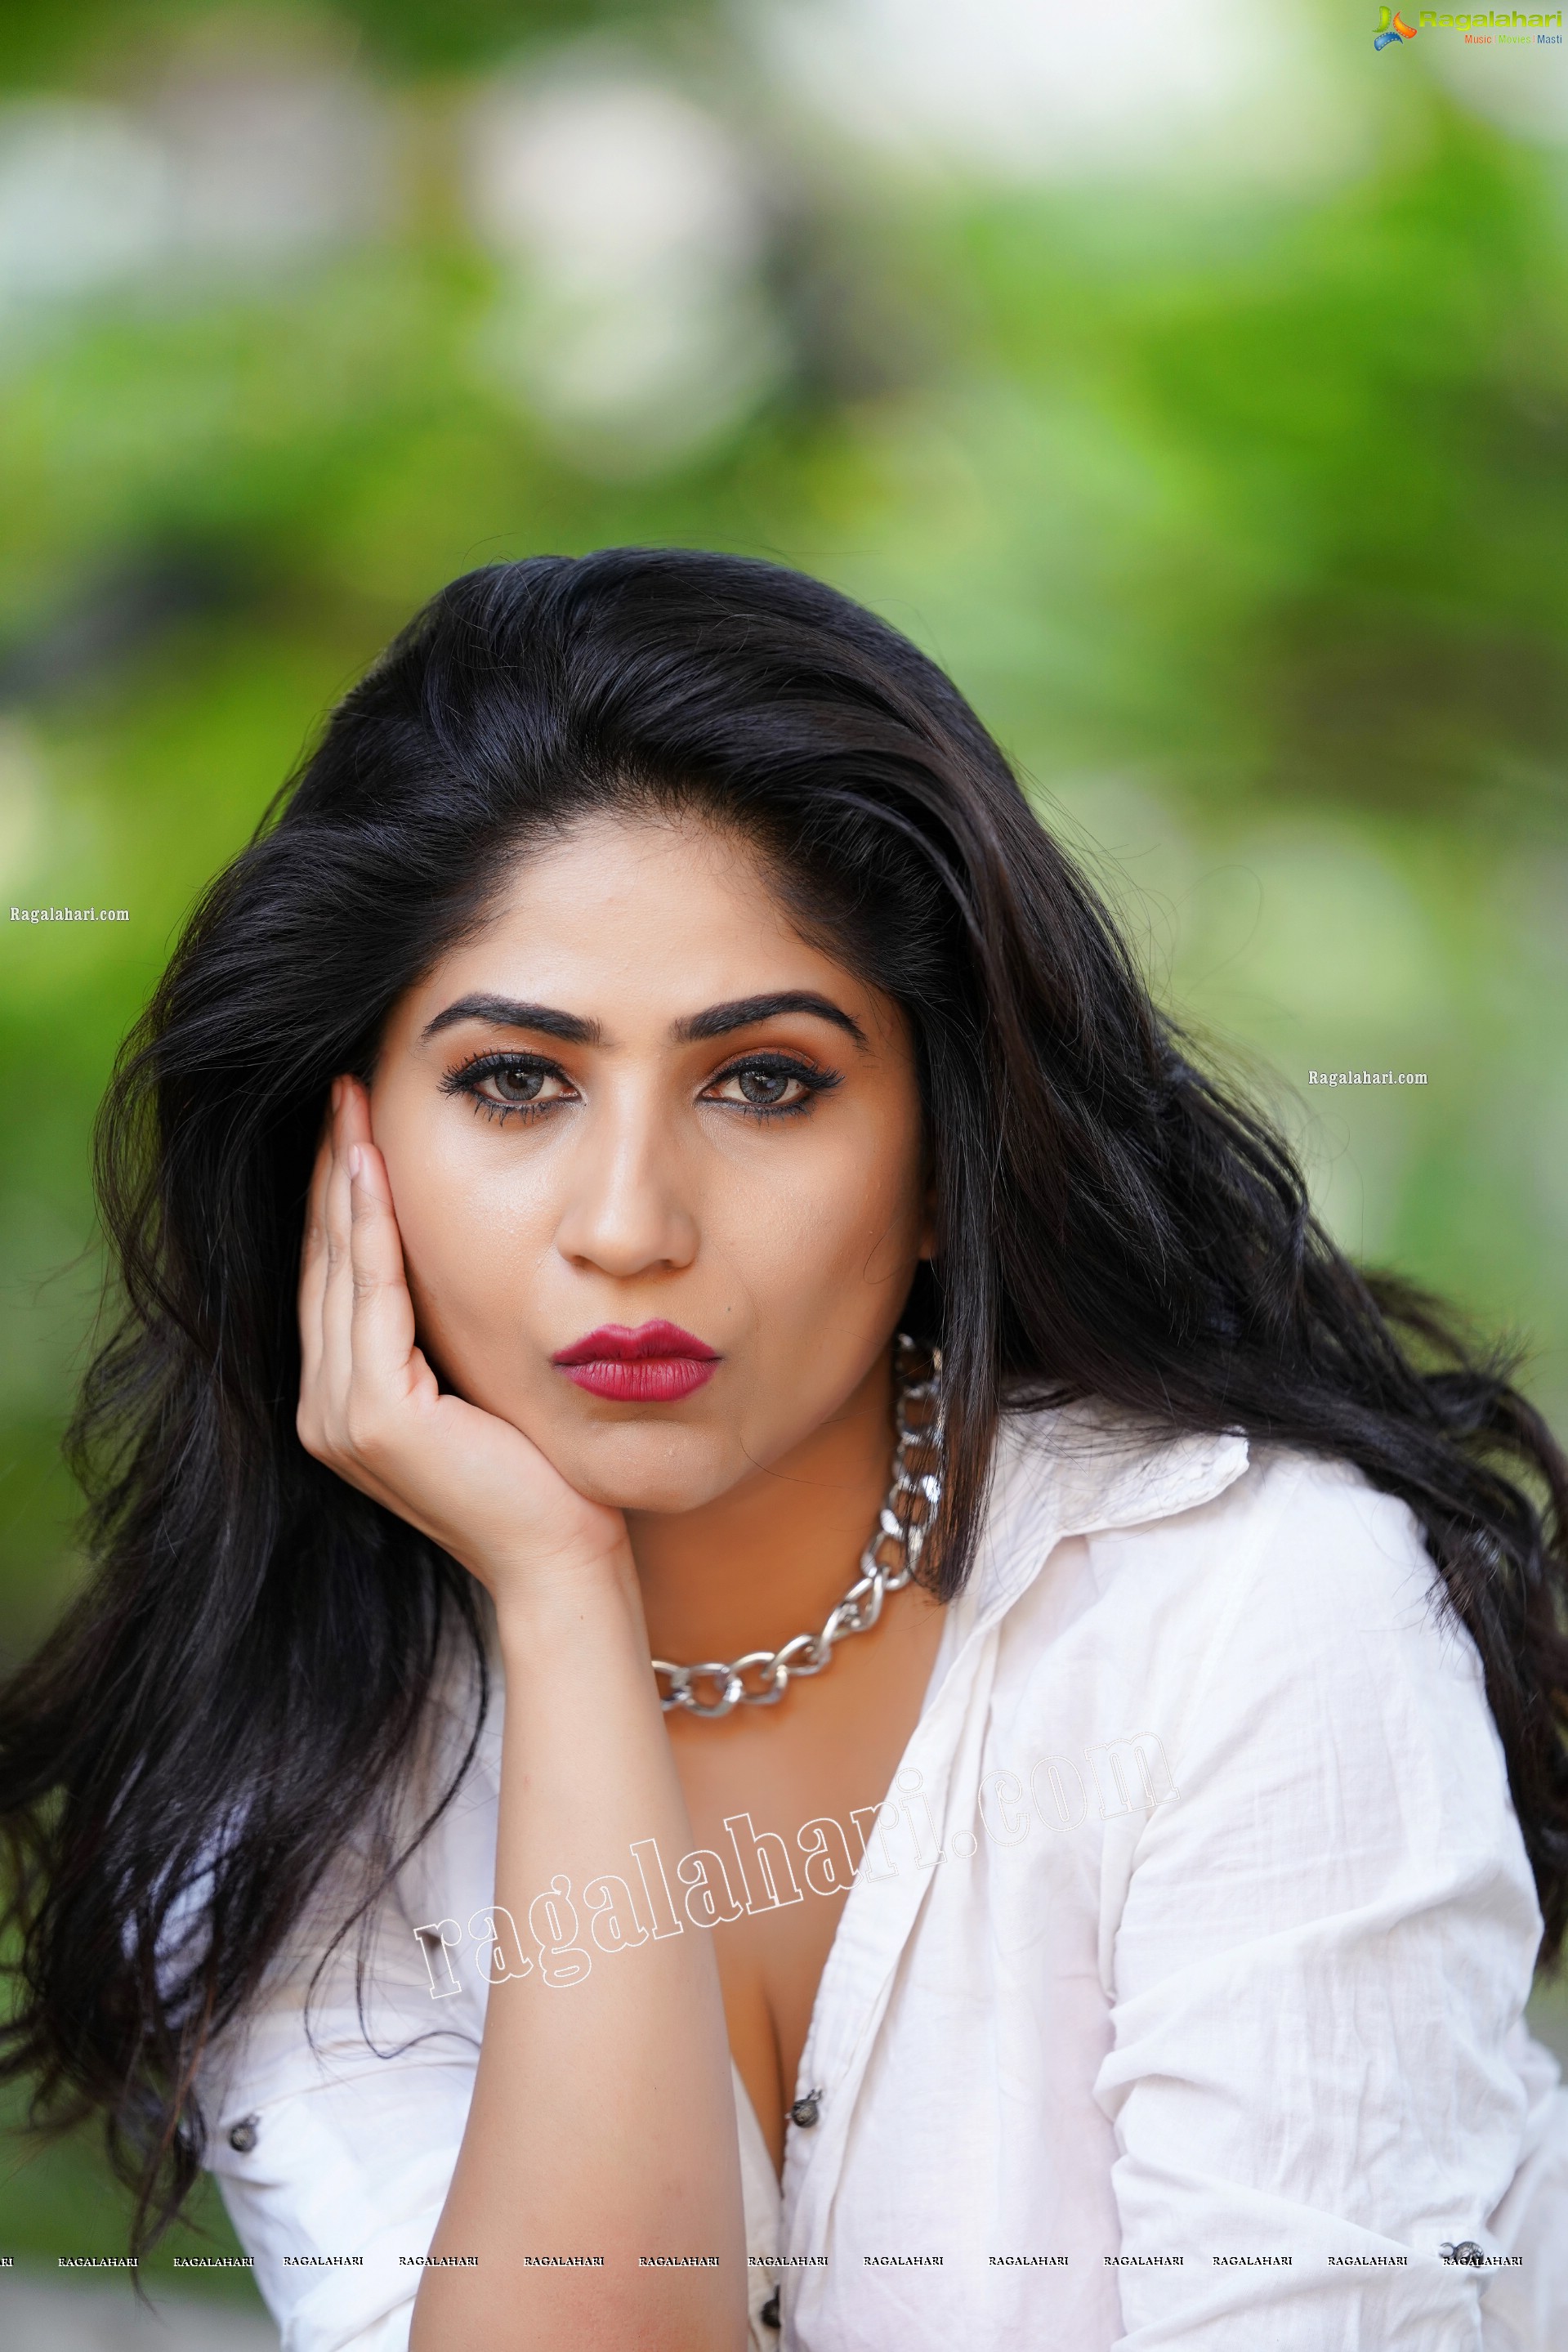 Madhulagna Das in White Shirt and Denim Shorts, Exclusive Photoshoot